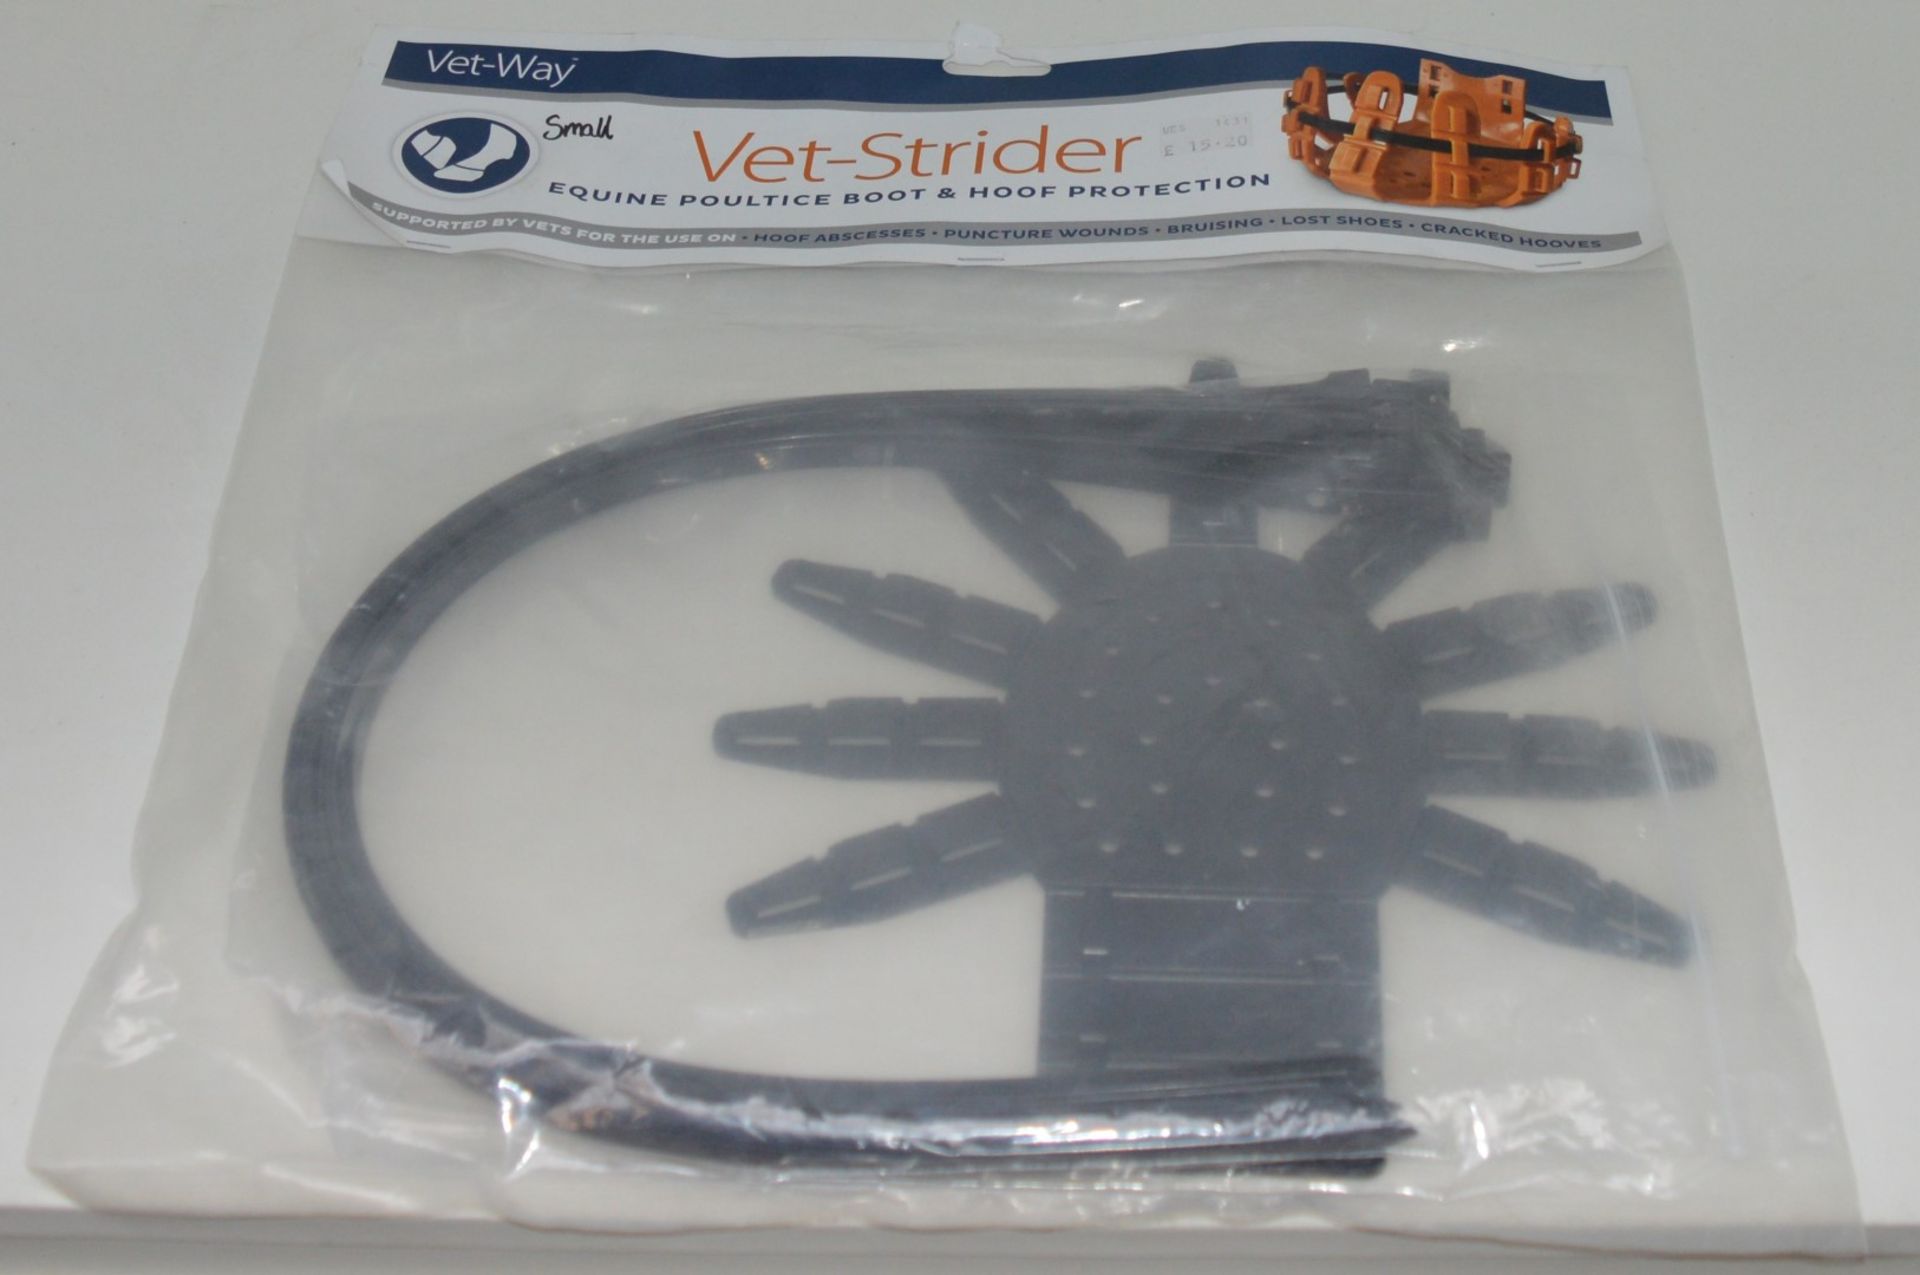 1 x Vet-Strider Equine Poultice Boot and Hoof Protection - CL401 - Suitable For Use on Hoof - Image 4 of 4